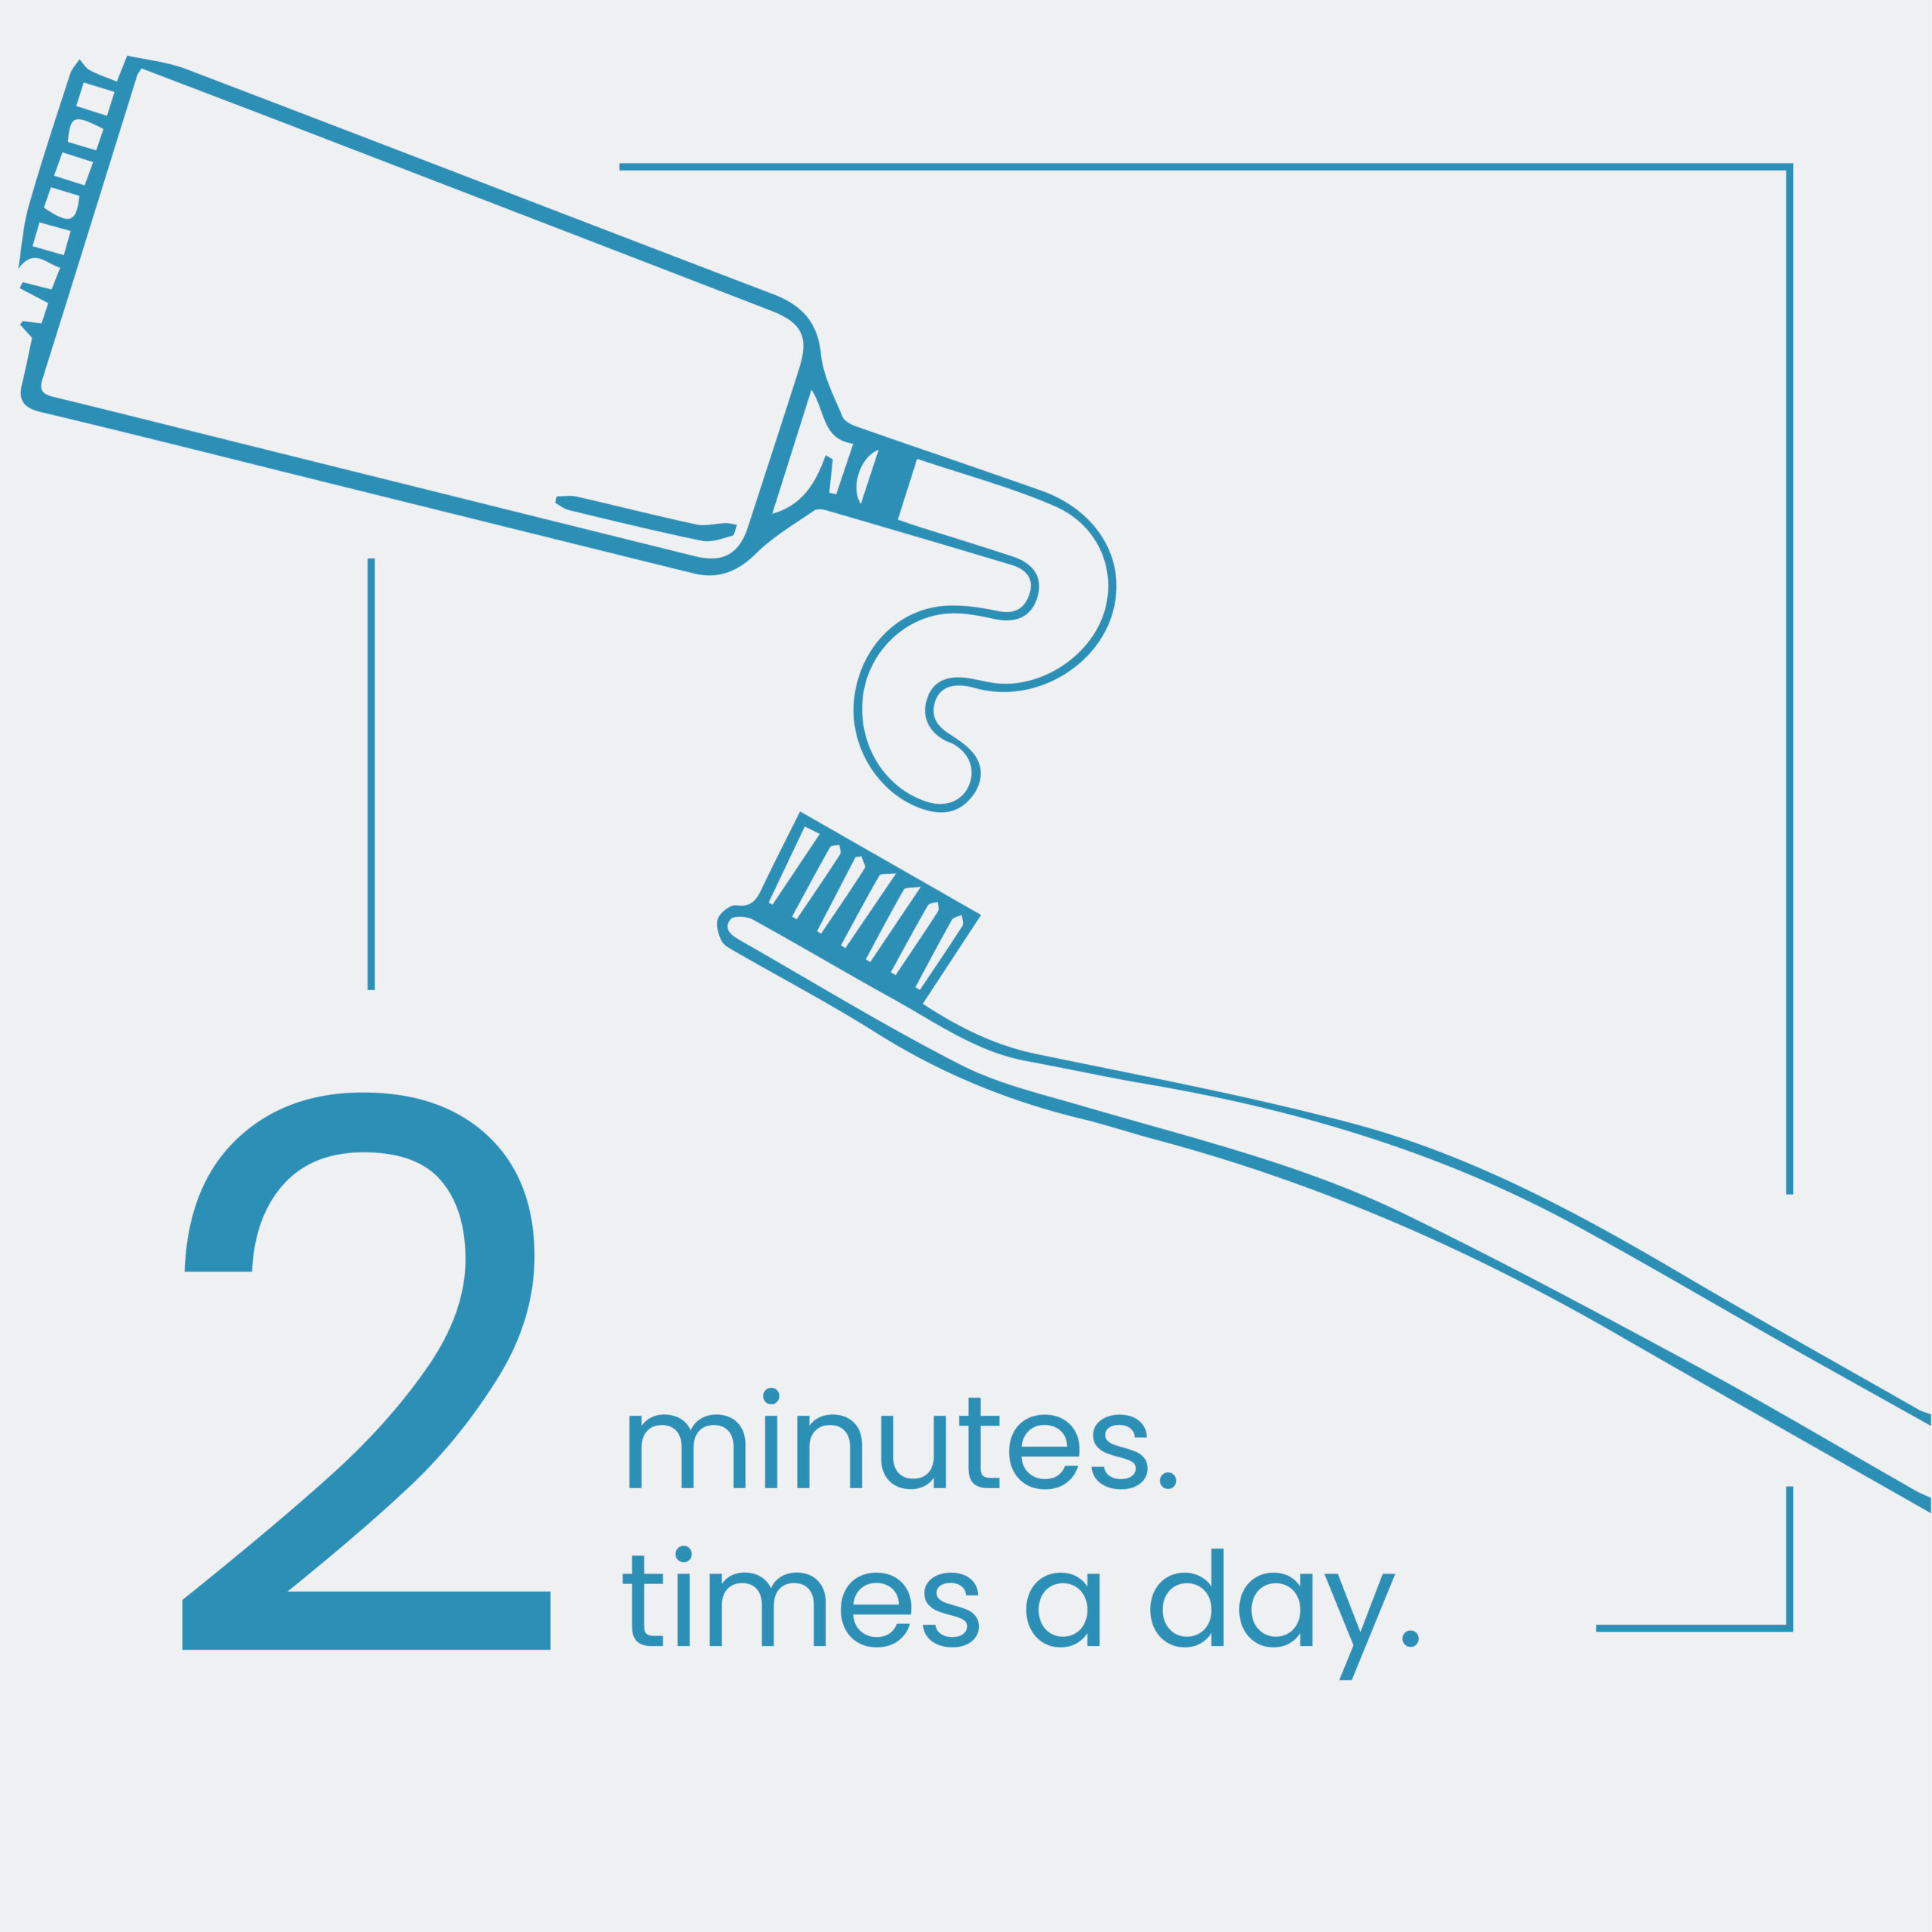 Brush for 2 minutes a day.